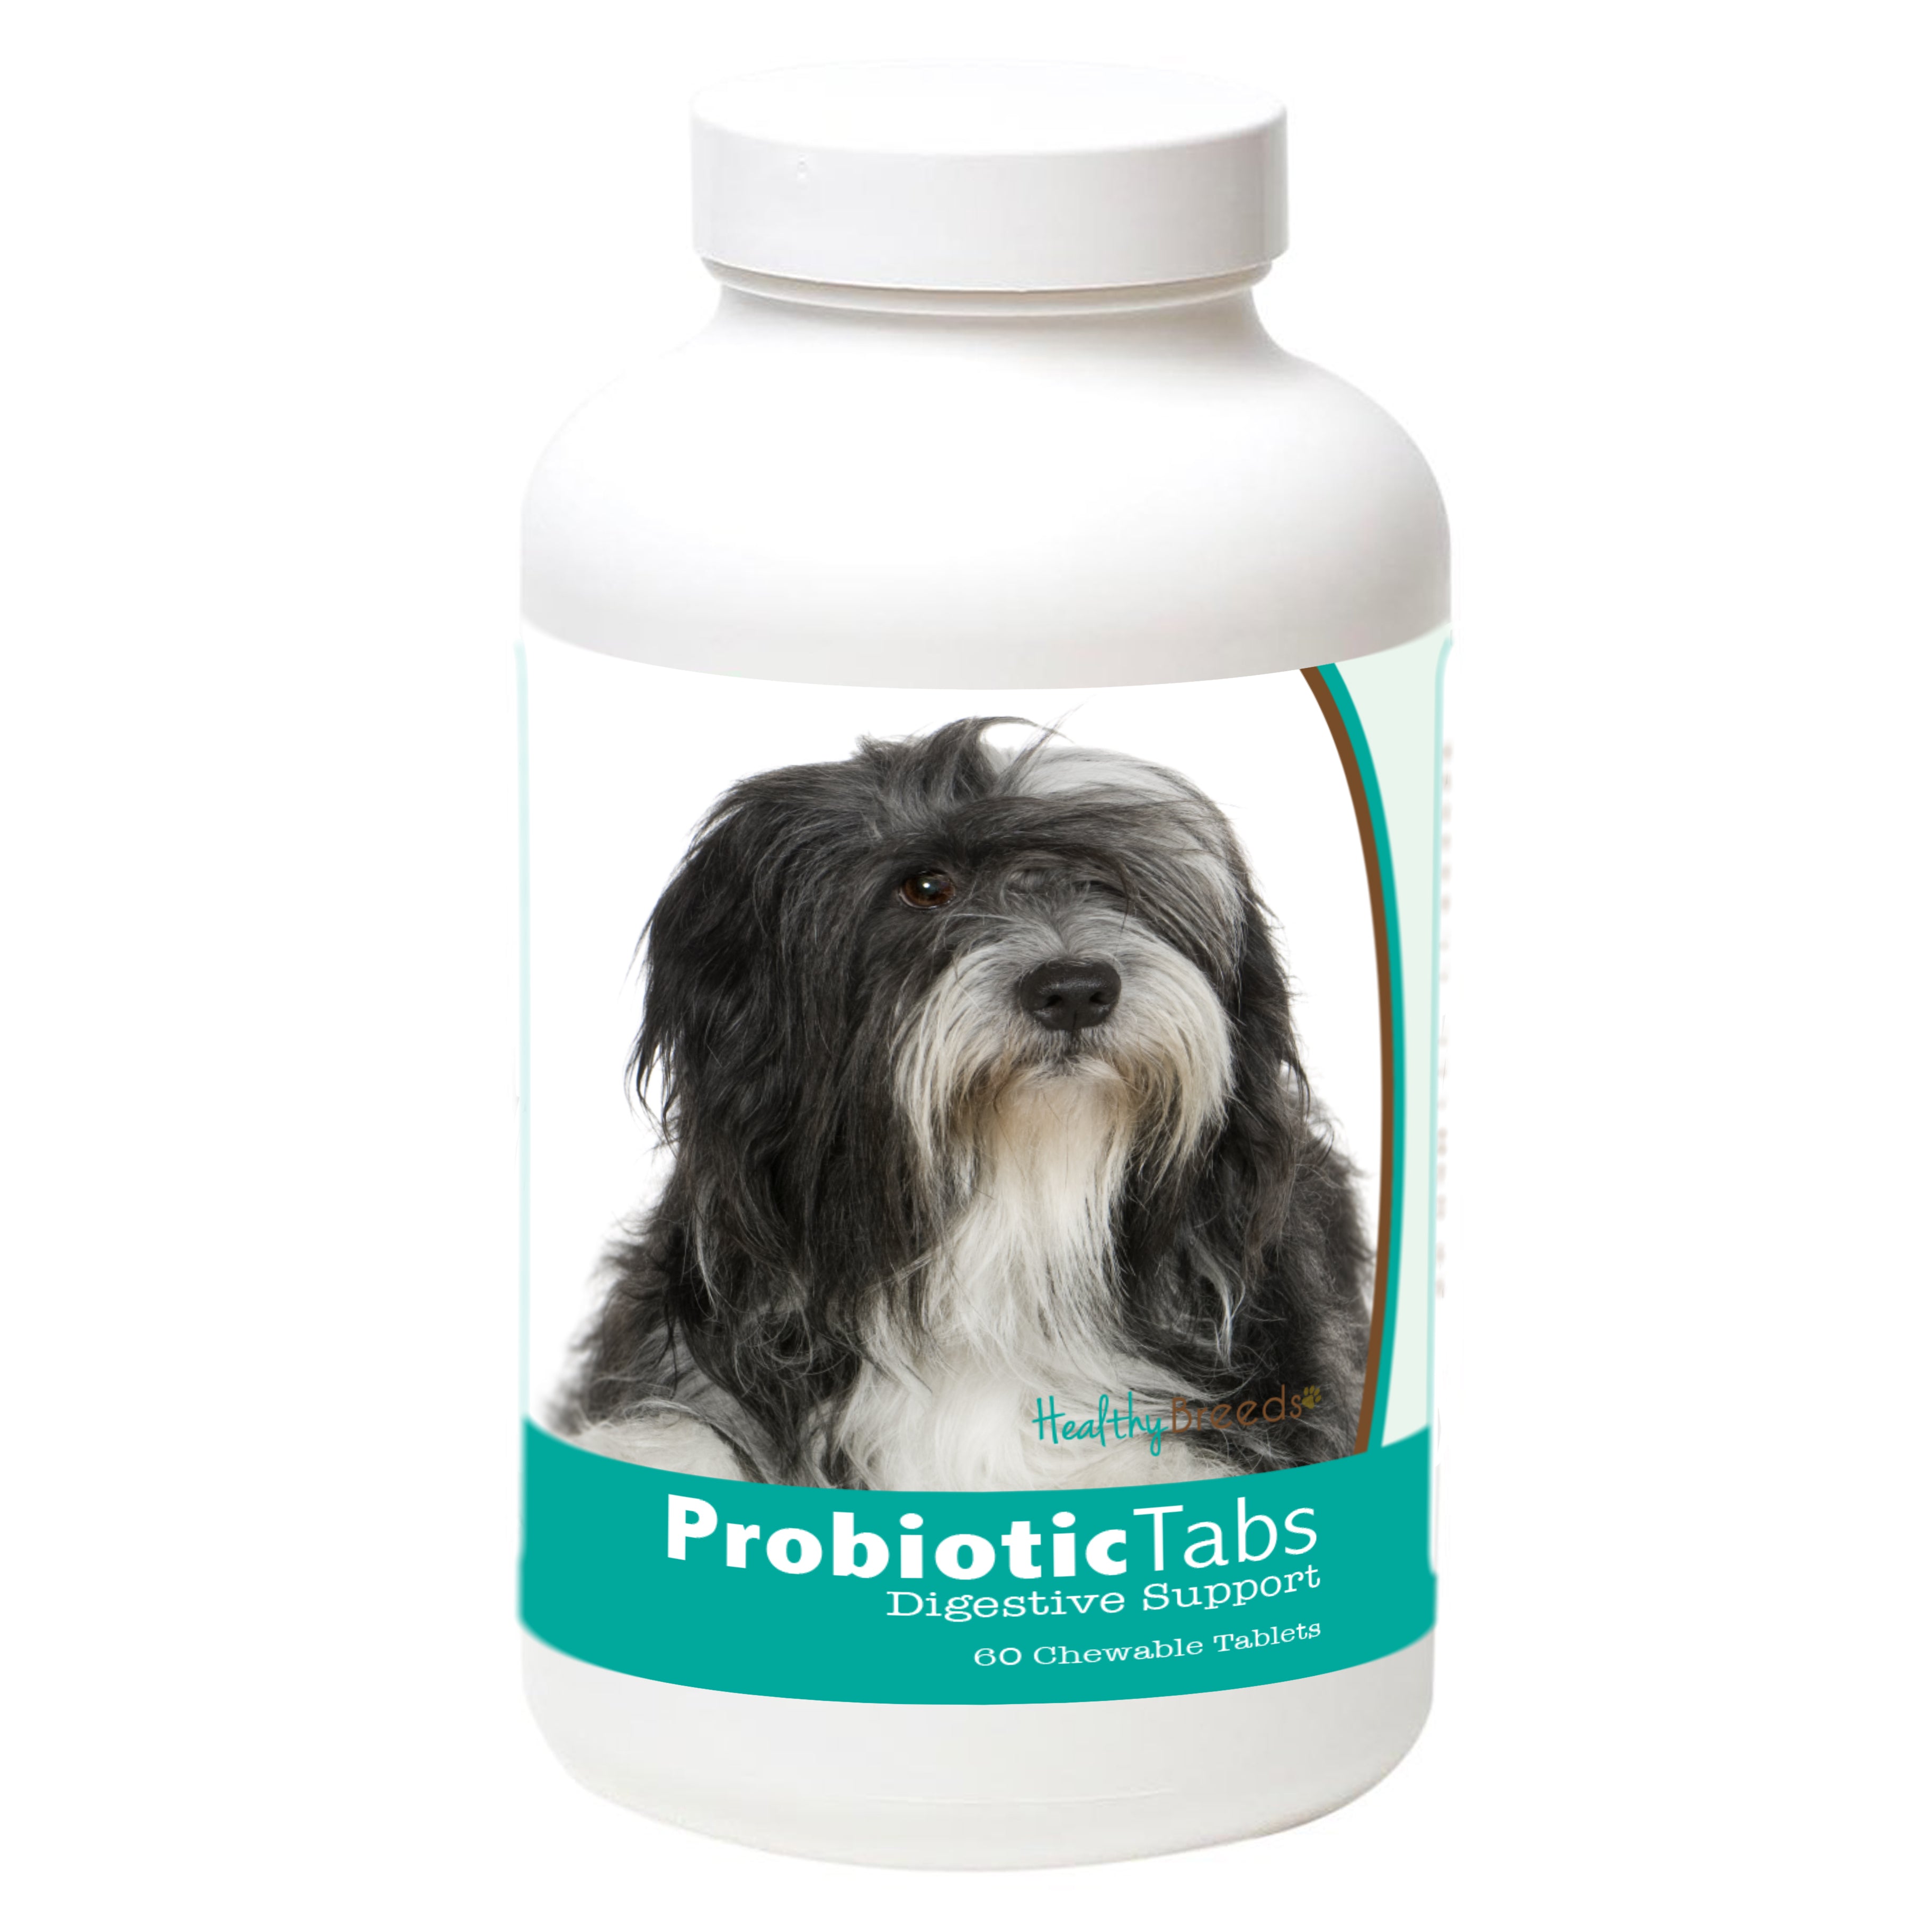 Lhasa Apso Probiotic and Digestive Support for Dogs 60 Count